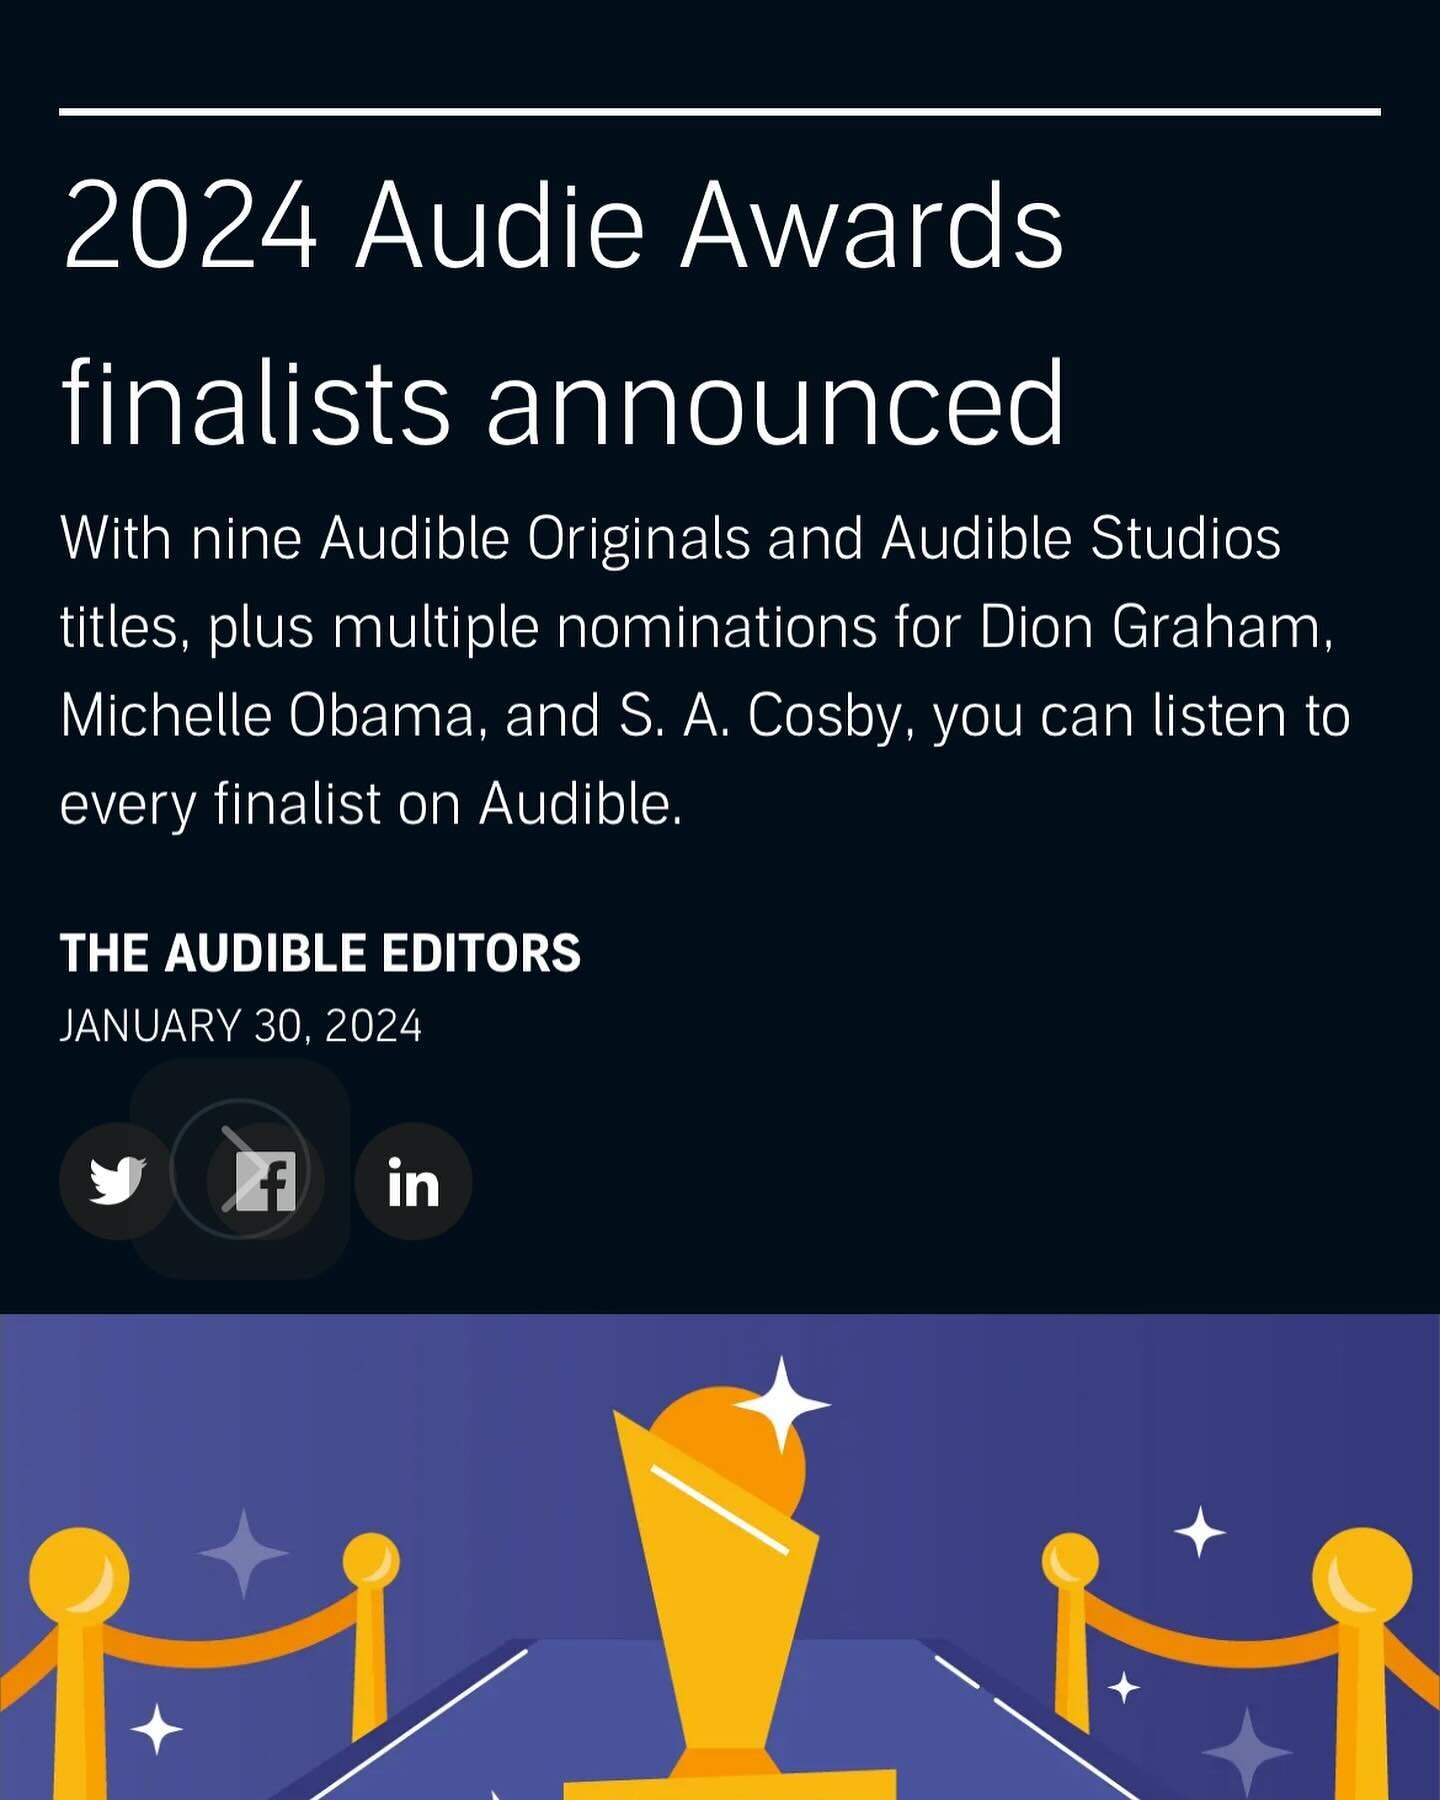 Some exciting news to share😬 Thanks @audible for nominating 
#TheYearofJubilee for #bookoftheyear 🙌 - Some amazing books on this list.